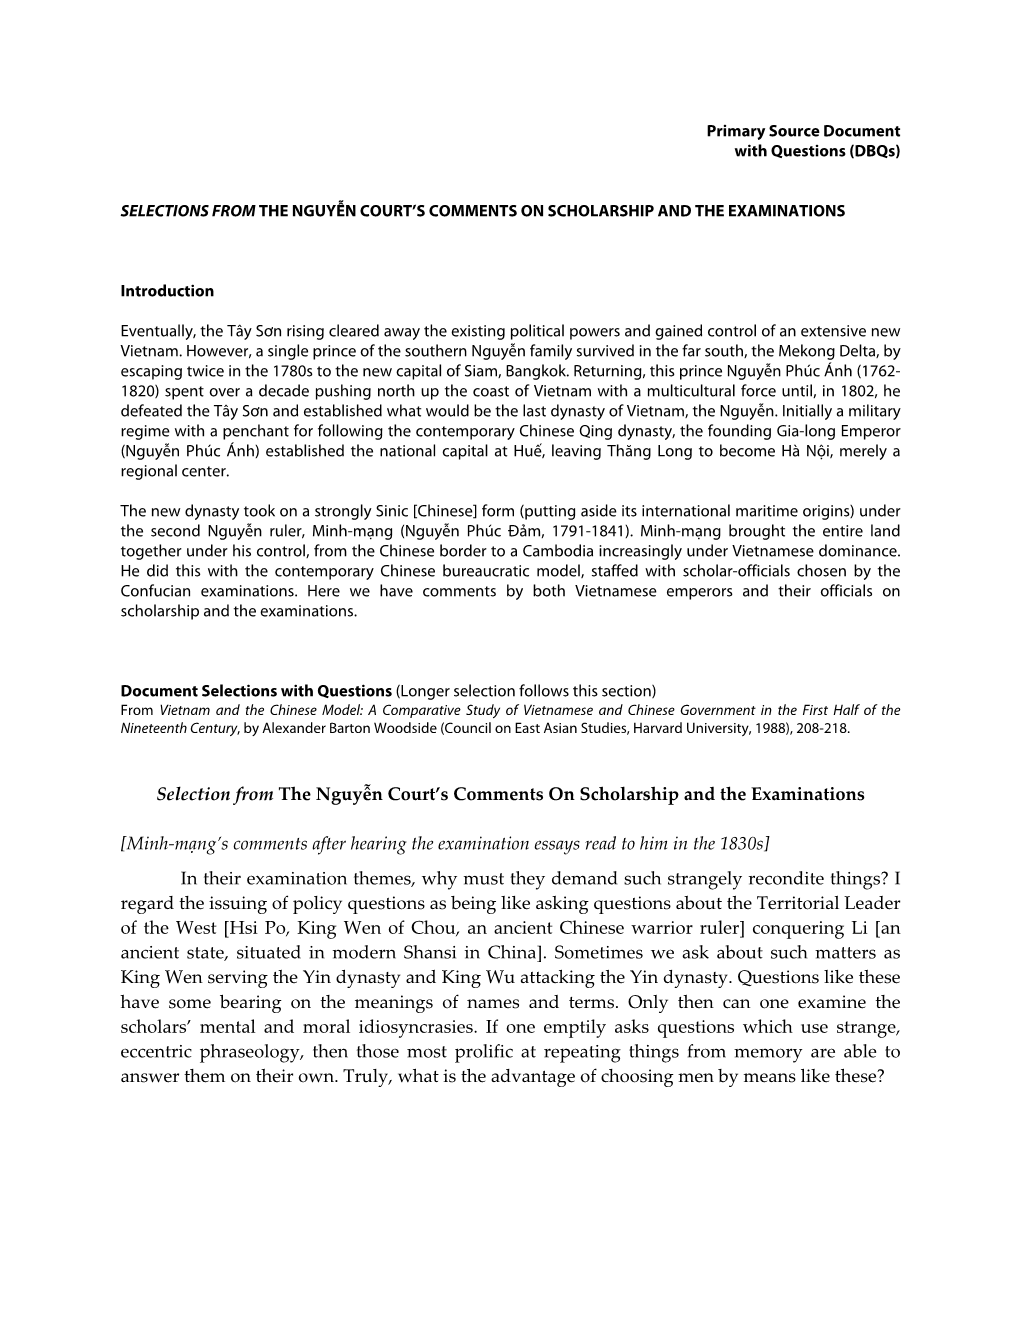 Selection from the Nguyễn Court's Comments on Scholarship and The